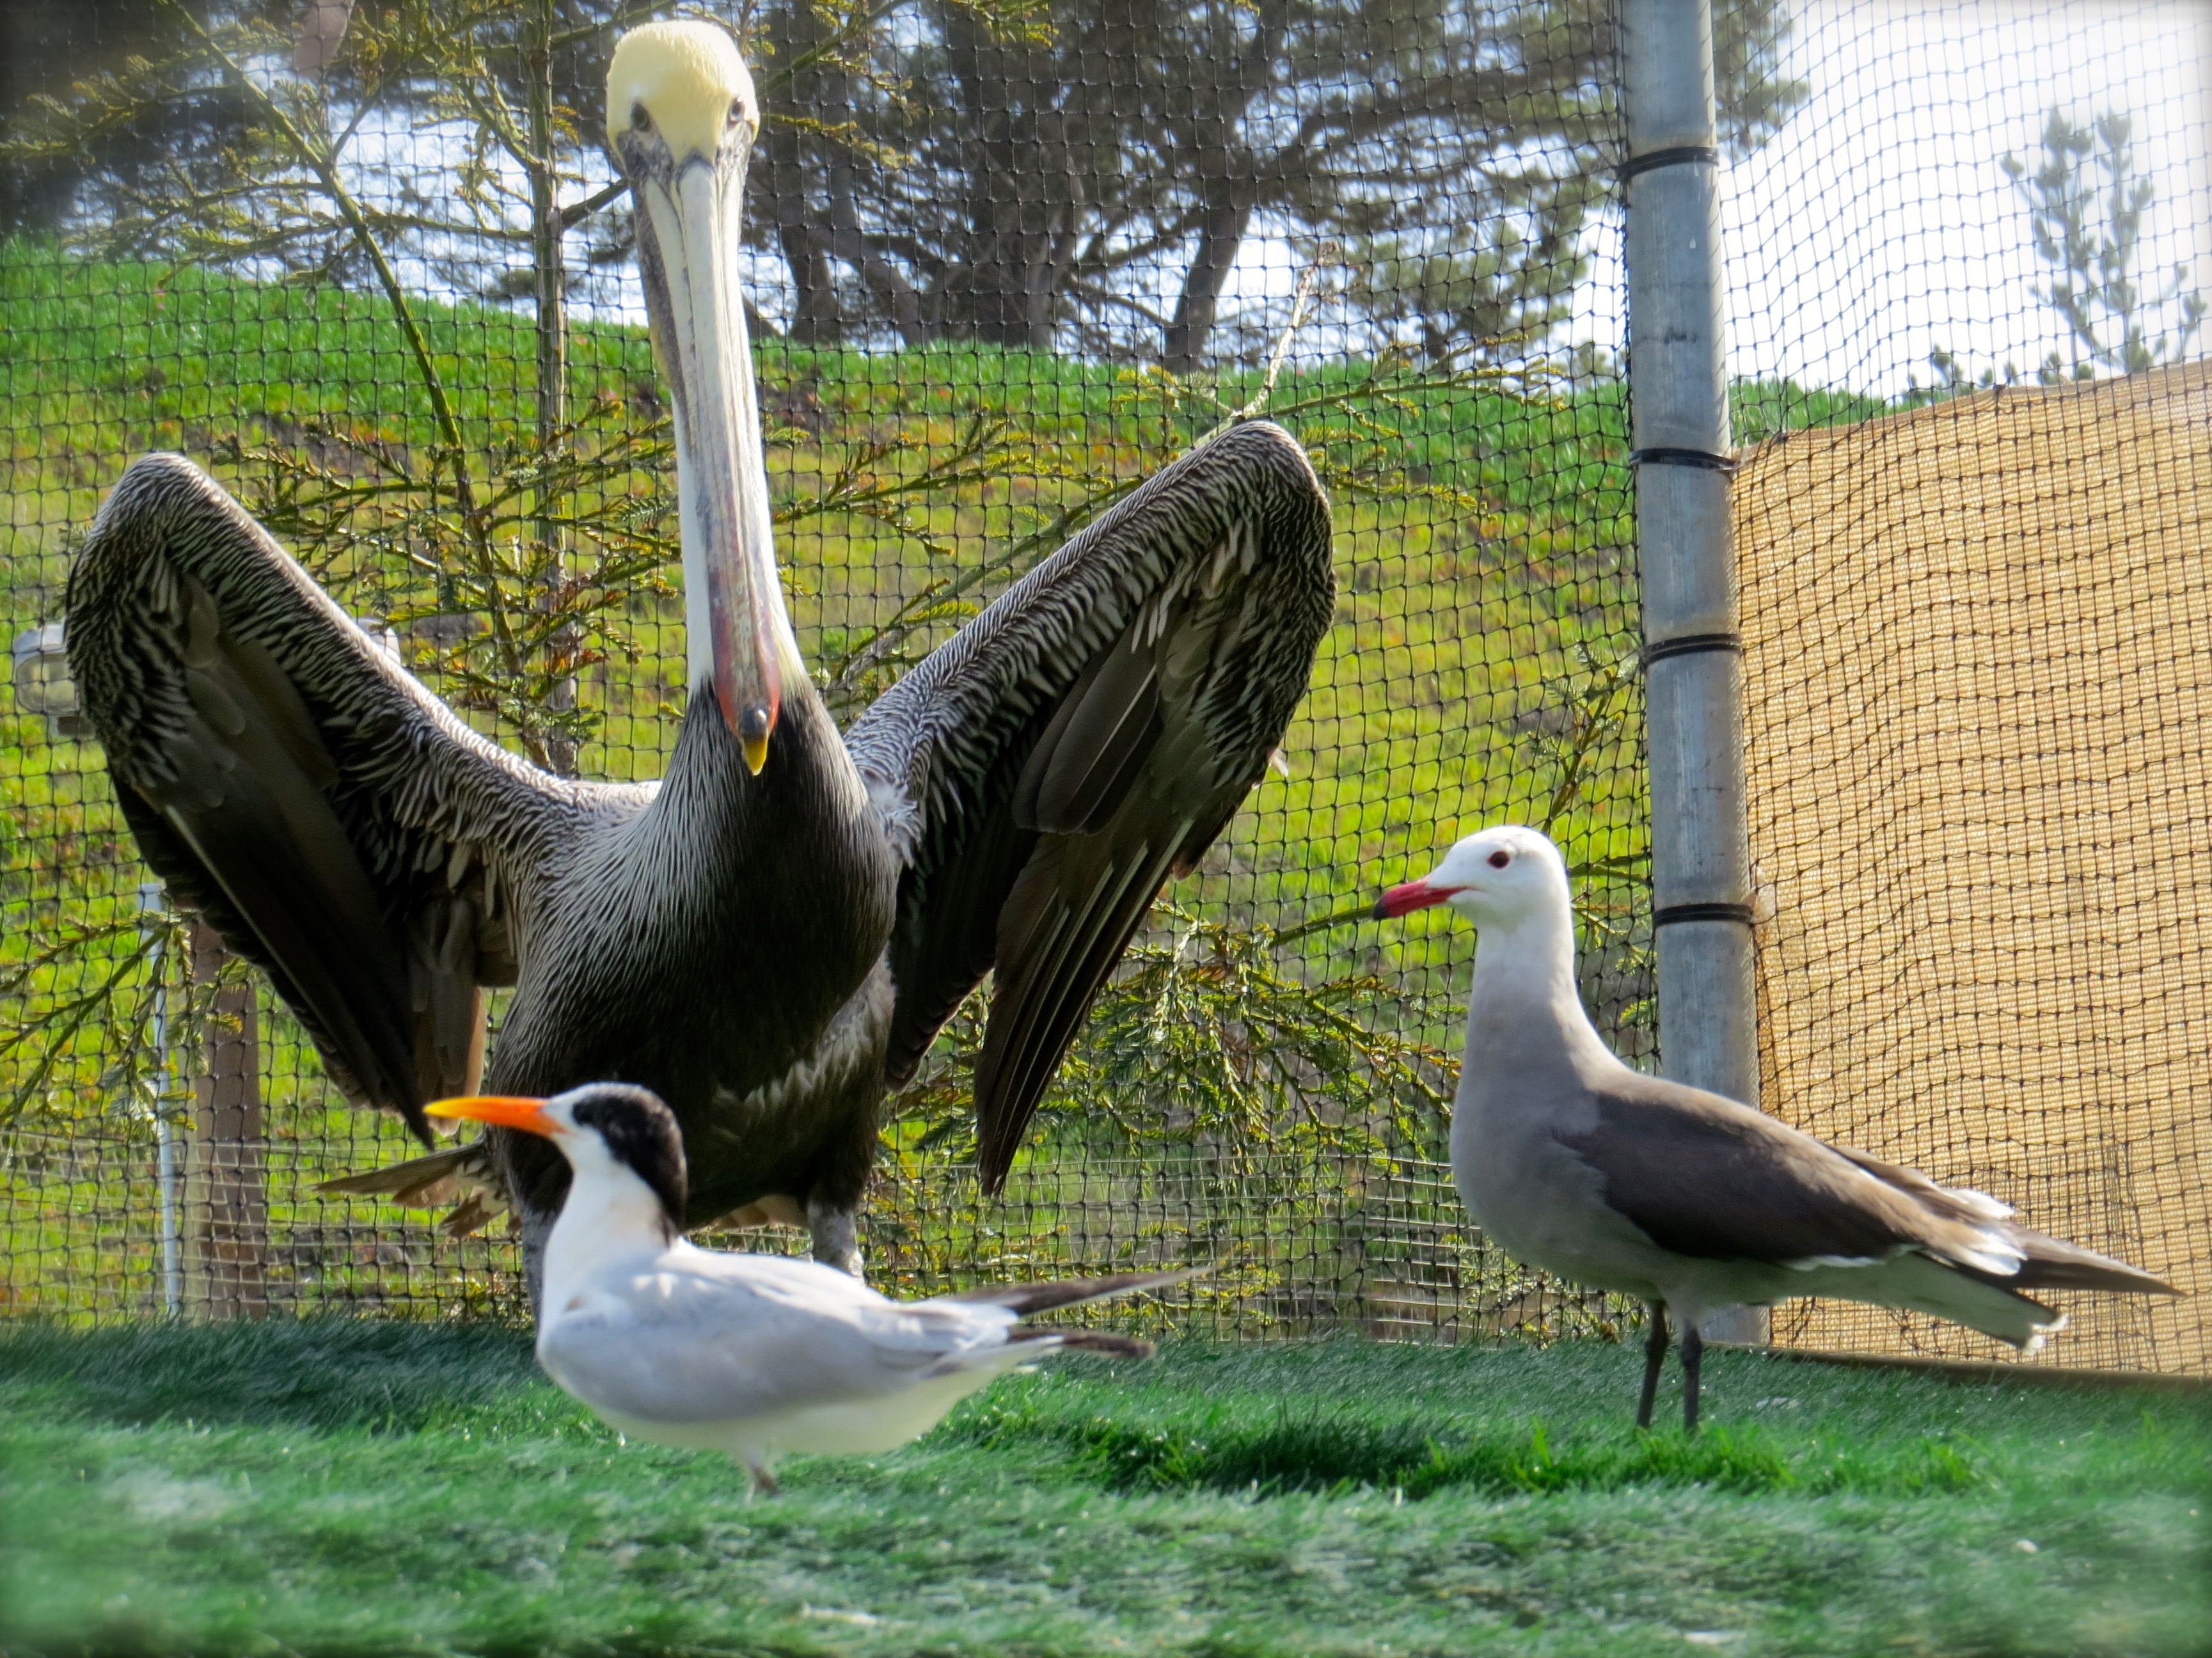 Last week I visited the Pacific Wildlife Center in Morro Bay, a site opened in 2007, all donor-financed and opened 365 days a year to all injured wildlife except  grown bears. Last year they cared for 2014 reptiles, mammals and birds. Recovering here are a northern California brown pelican, Heermann's Gull and a Royal Tern.